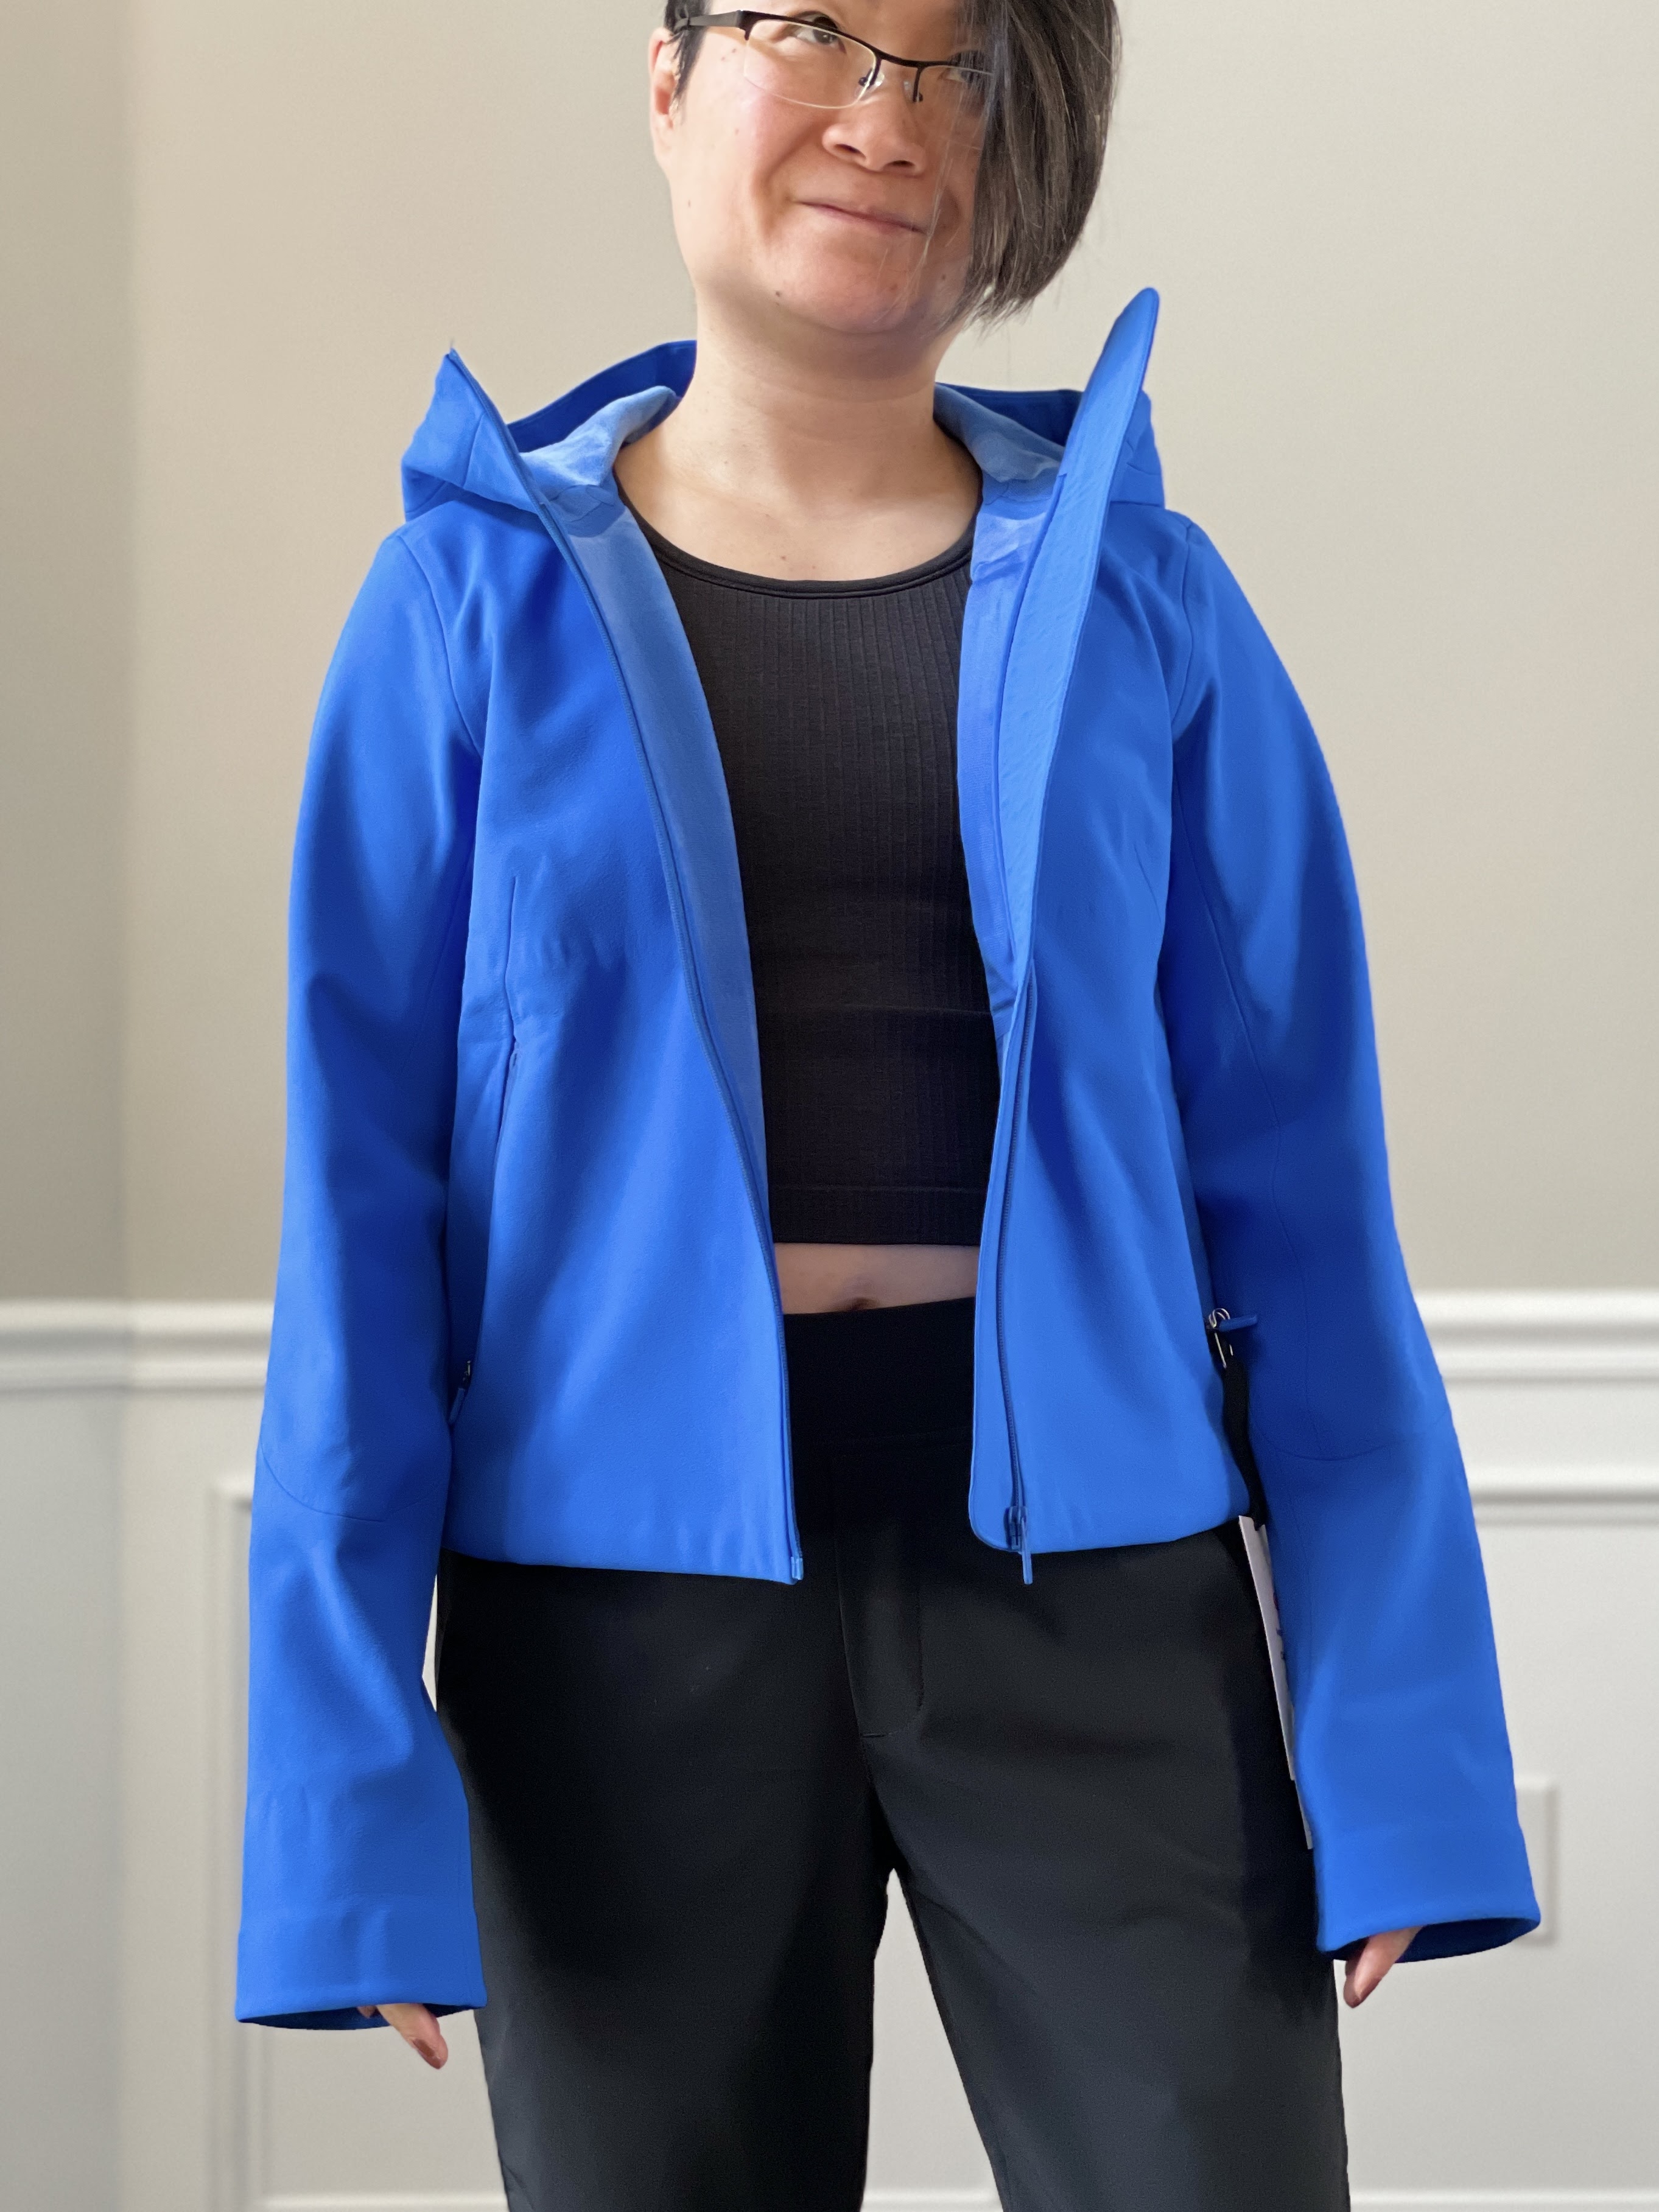 Fit Review Friday! RepelShell Classic Fit Hoodie, Loungeful Zip Hoodie,  Loungeful Cropped Hoodie